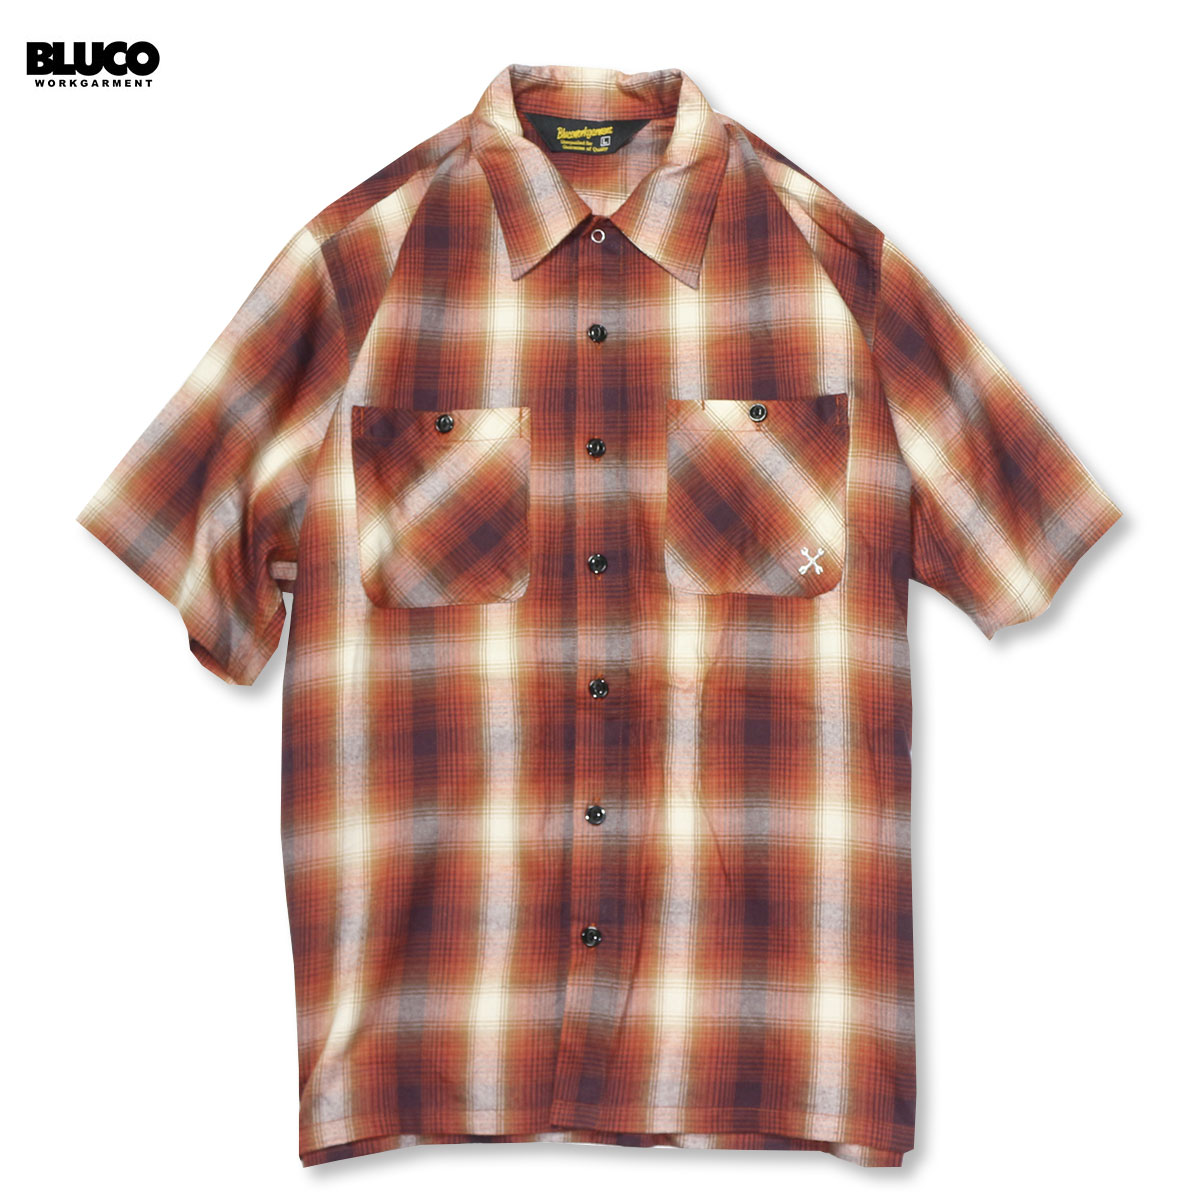 BLUCO(ブルコ) OL-108TO-22 OMBRE WORK SHIRTS S/S 全3色(ブ...